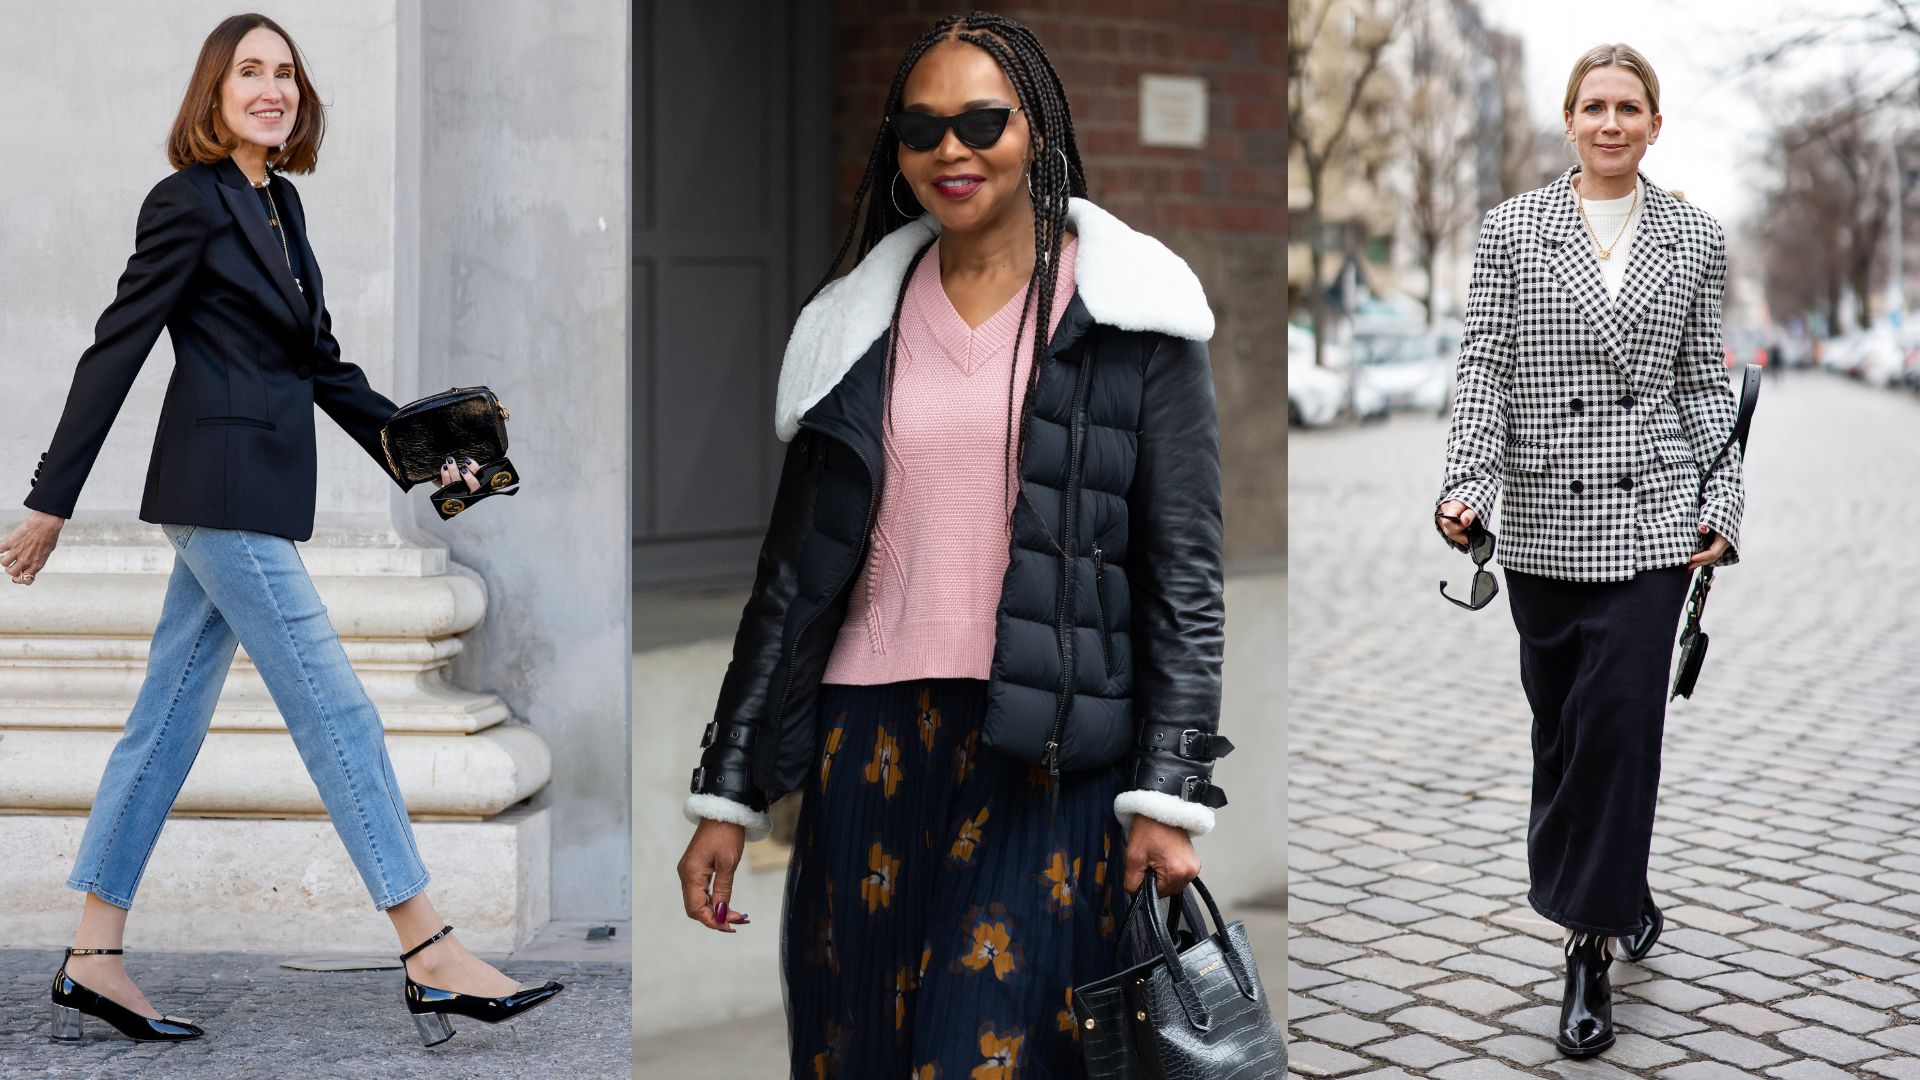 6 Chill Winter Fashion Trends To Add to Your Closet